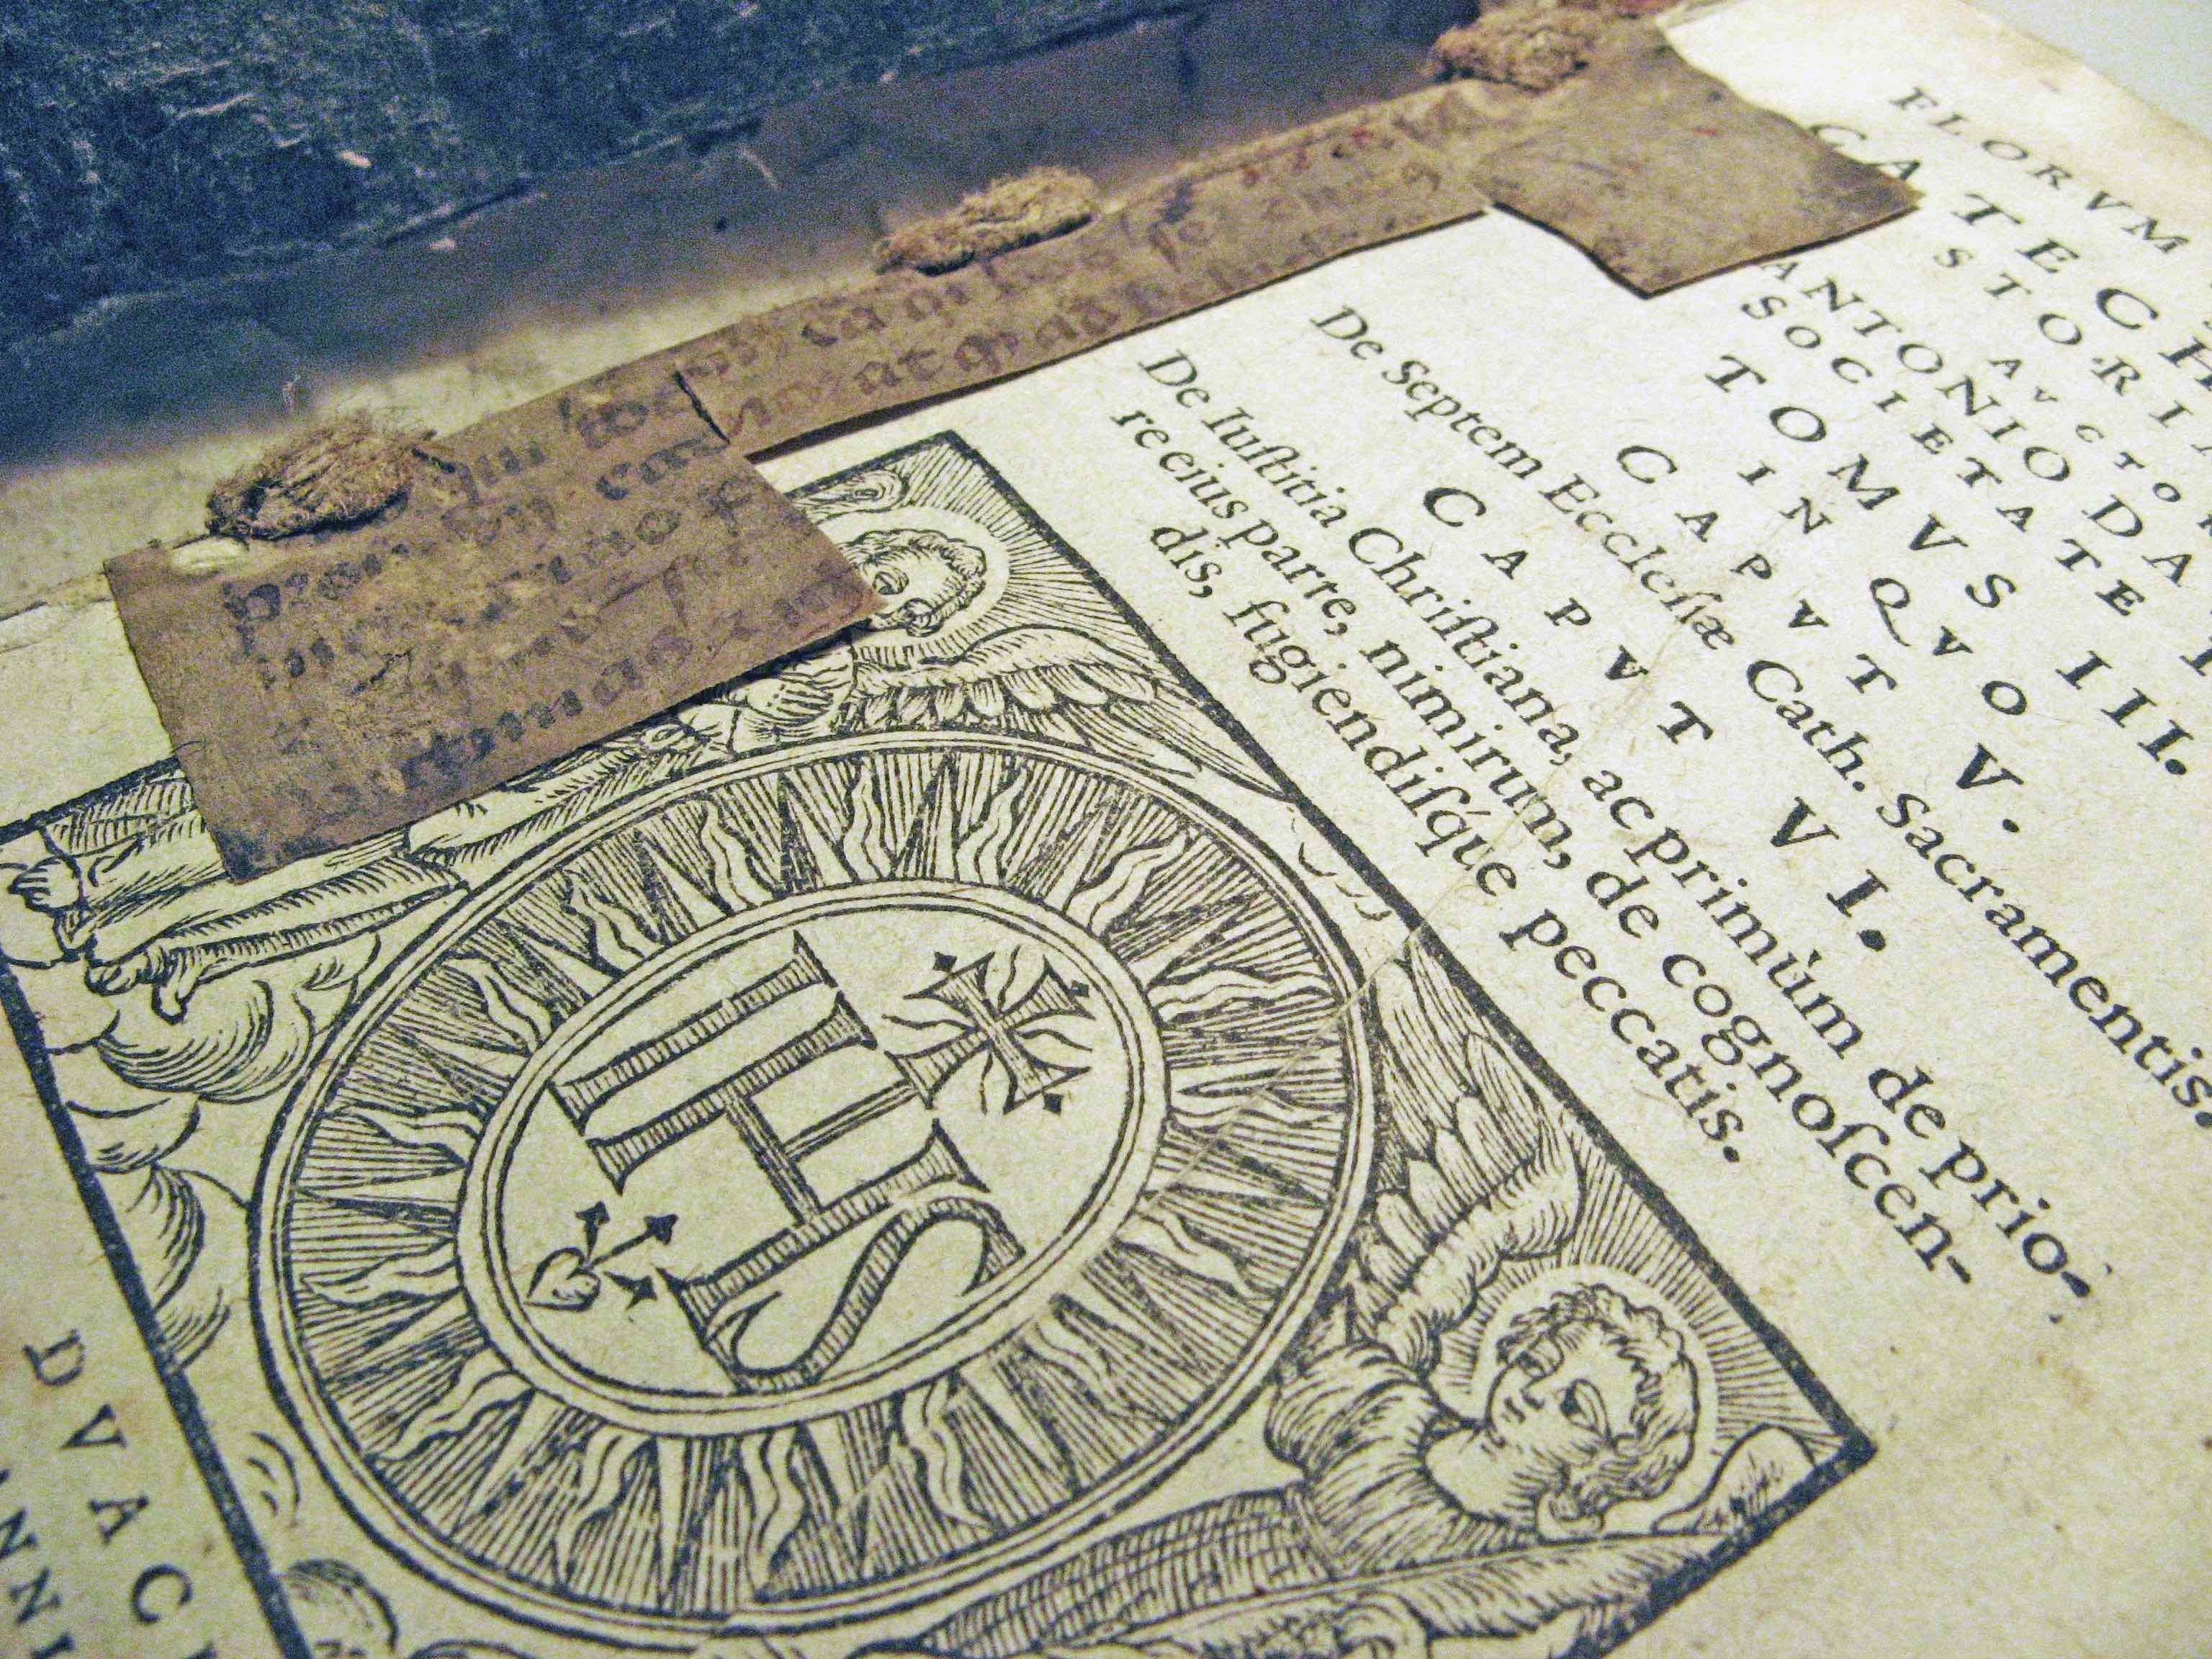 Pieces of parchment manuscript help hold together a printed book